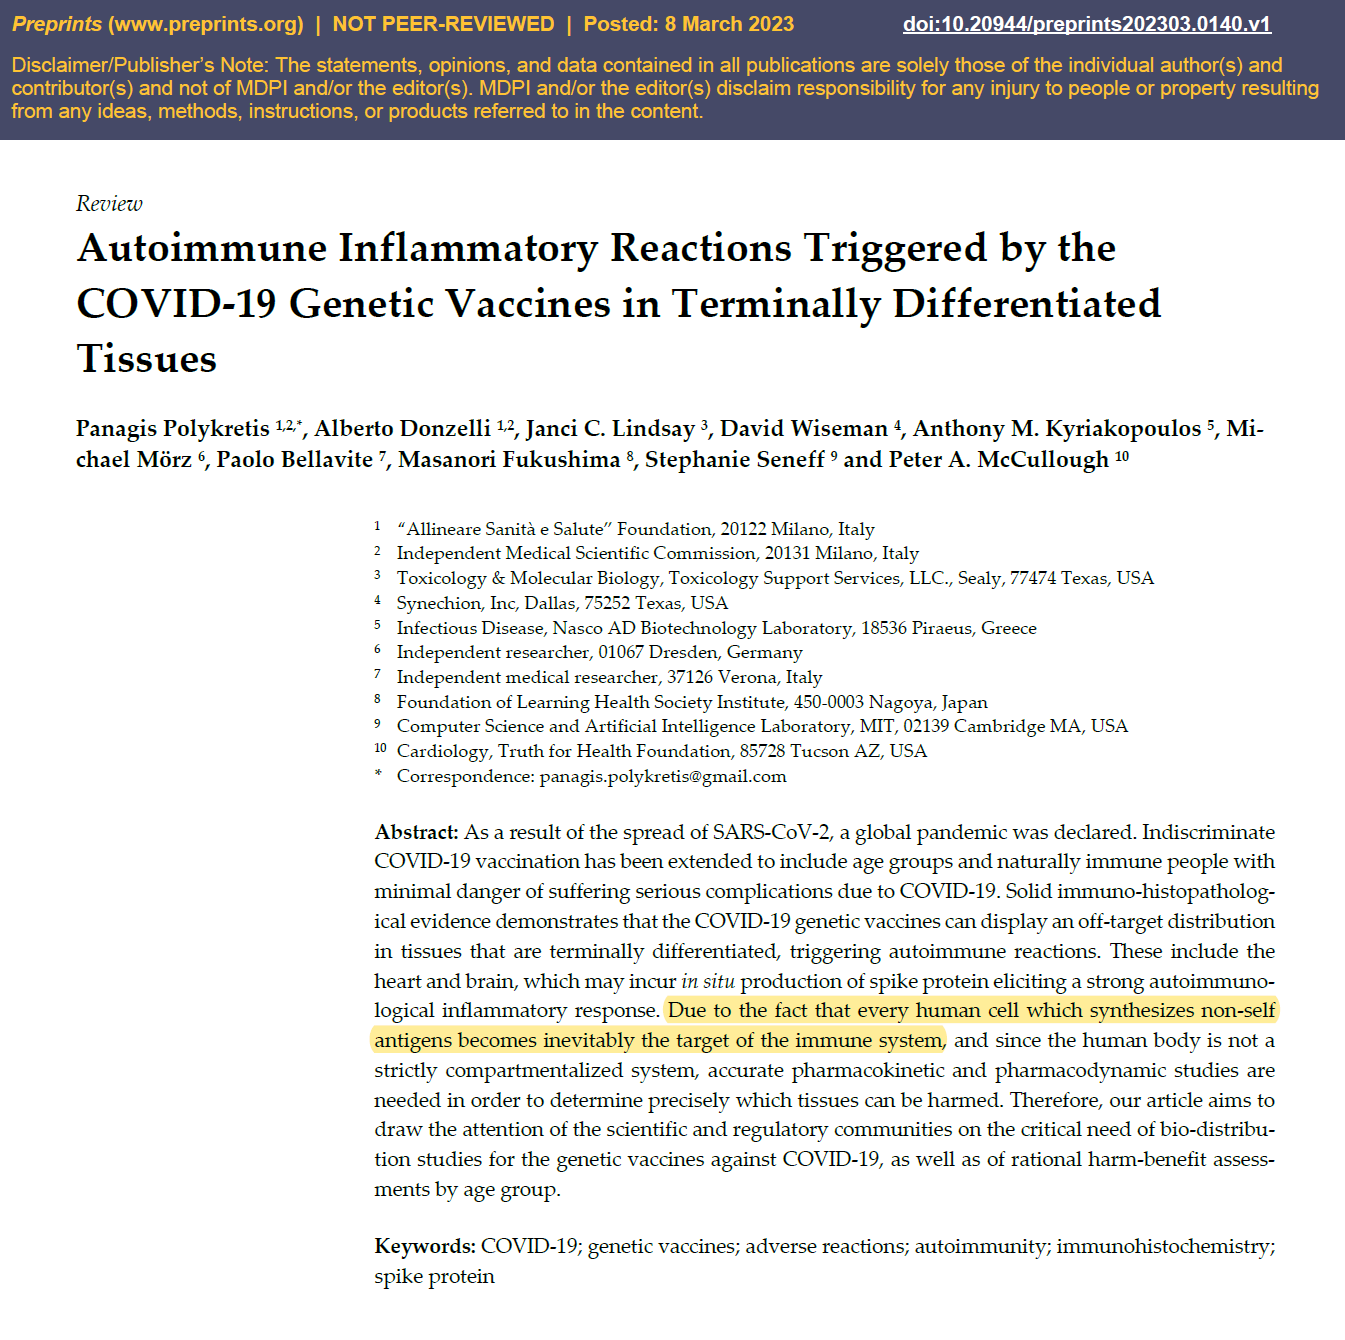 Polykretis, P.; Donzelli, A.; Lindsay, J.C.; Wiseman, D.; Kyriakopoulos, A.M.; Mörz, M.; Bellavite, P.; Fukushima, M.; Seneff, S.; McCullough, P.A. Autoimmune Inflammatory Reactions Triggered by the COVID-19 Genetic Vaccines in Terminally Differentiated Tissues. Preprints 2023, 2023030140. https://doi.org/10.20944/preprints202303.0140.v1.